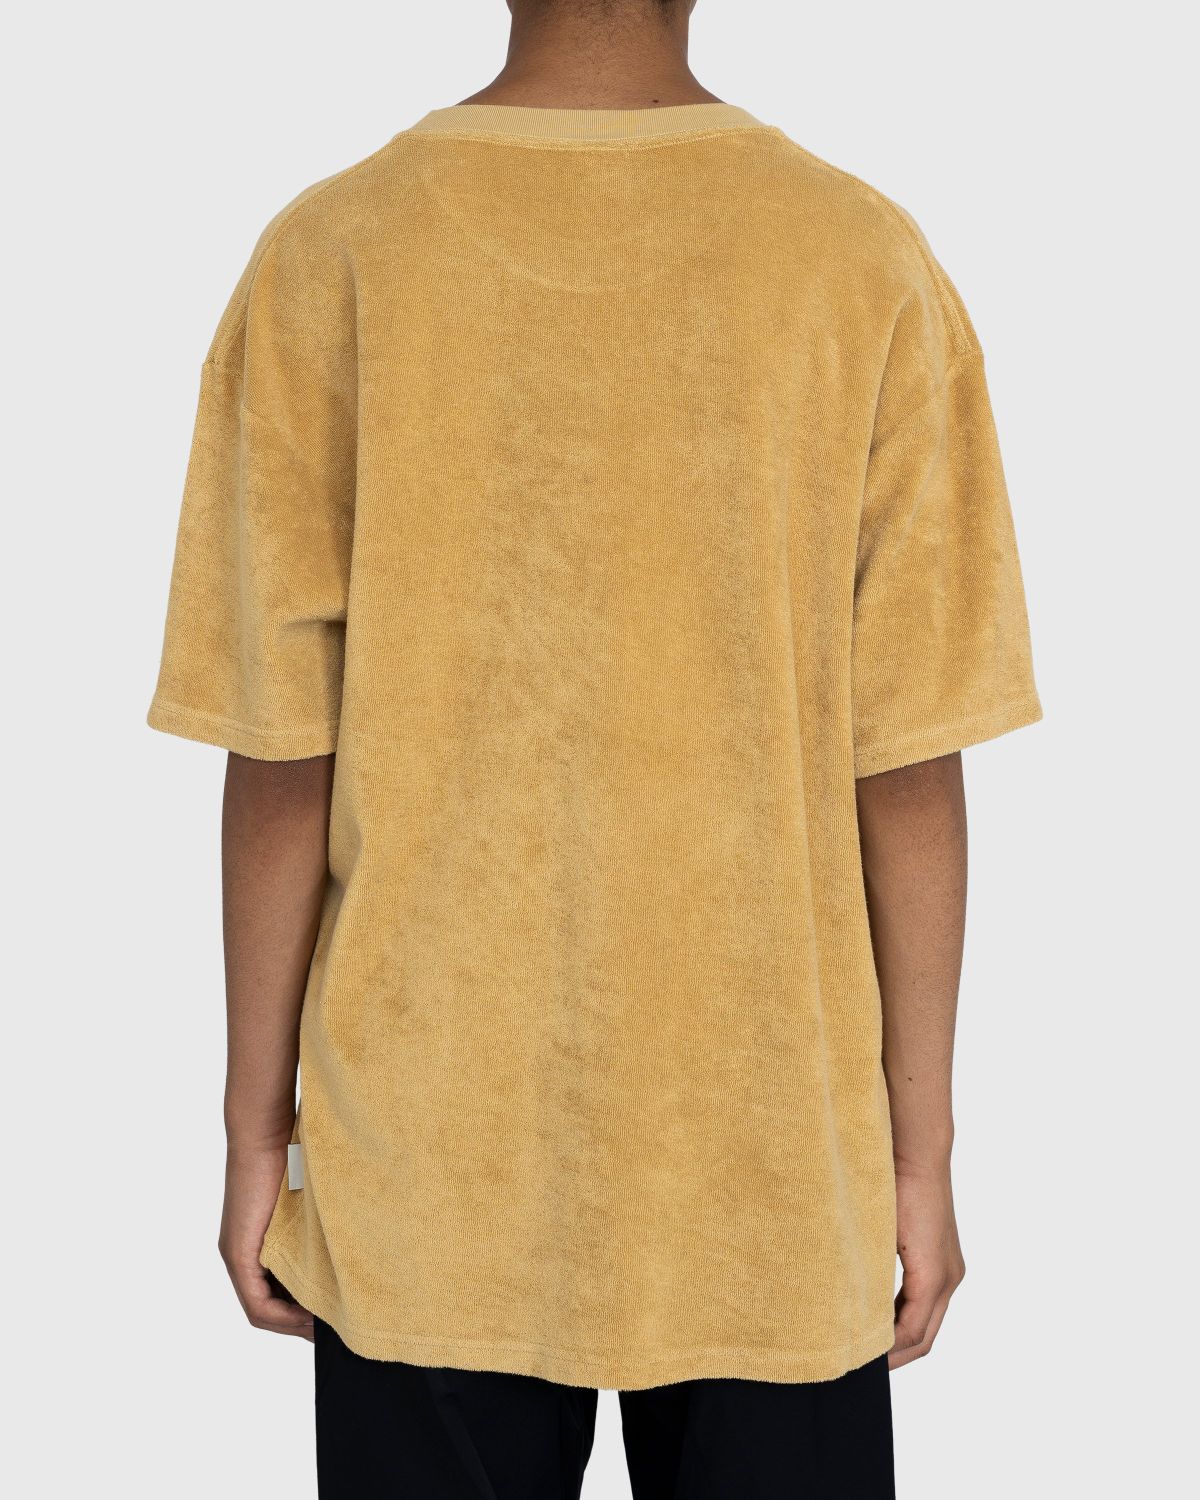 Highsnobiety – HS Logo Reverse Terry T-Shirt Brown - Tops - Brown - Image 3